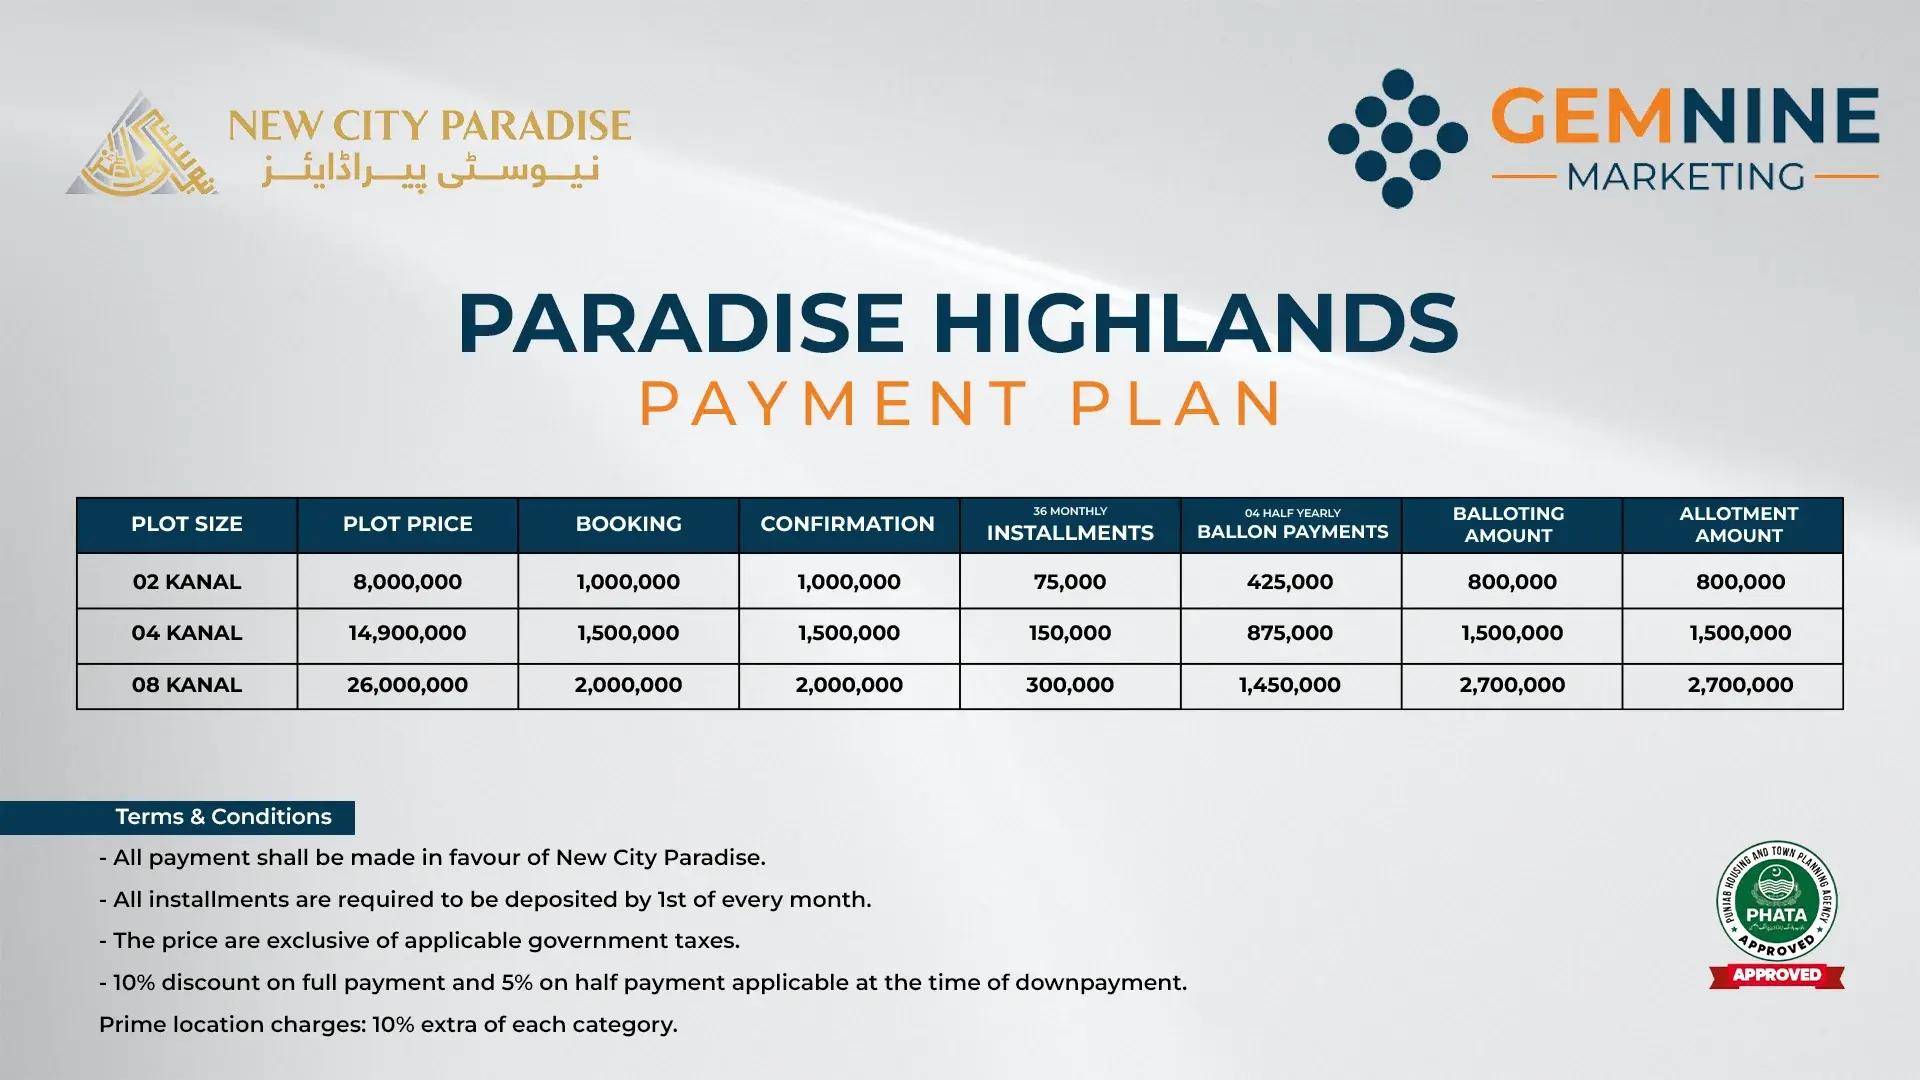 New City Paradise Highlands Payment Plan